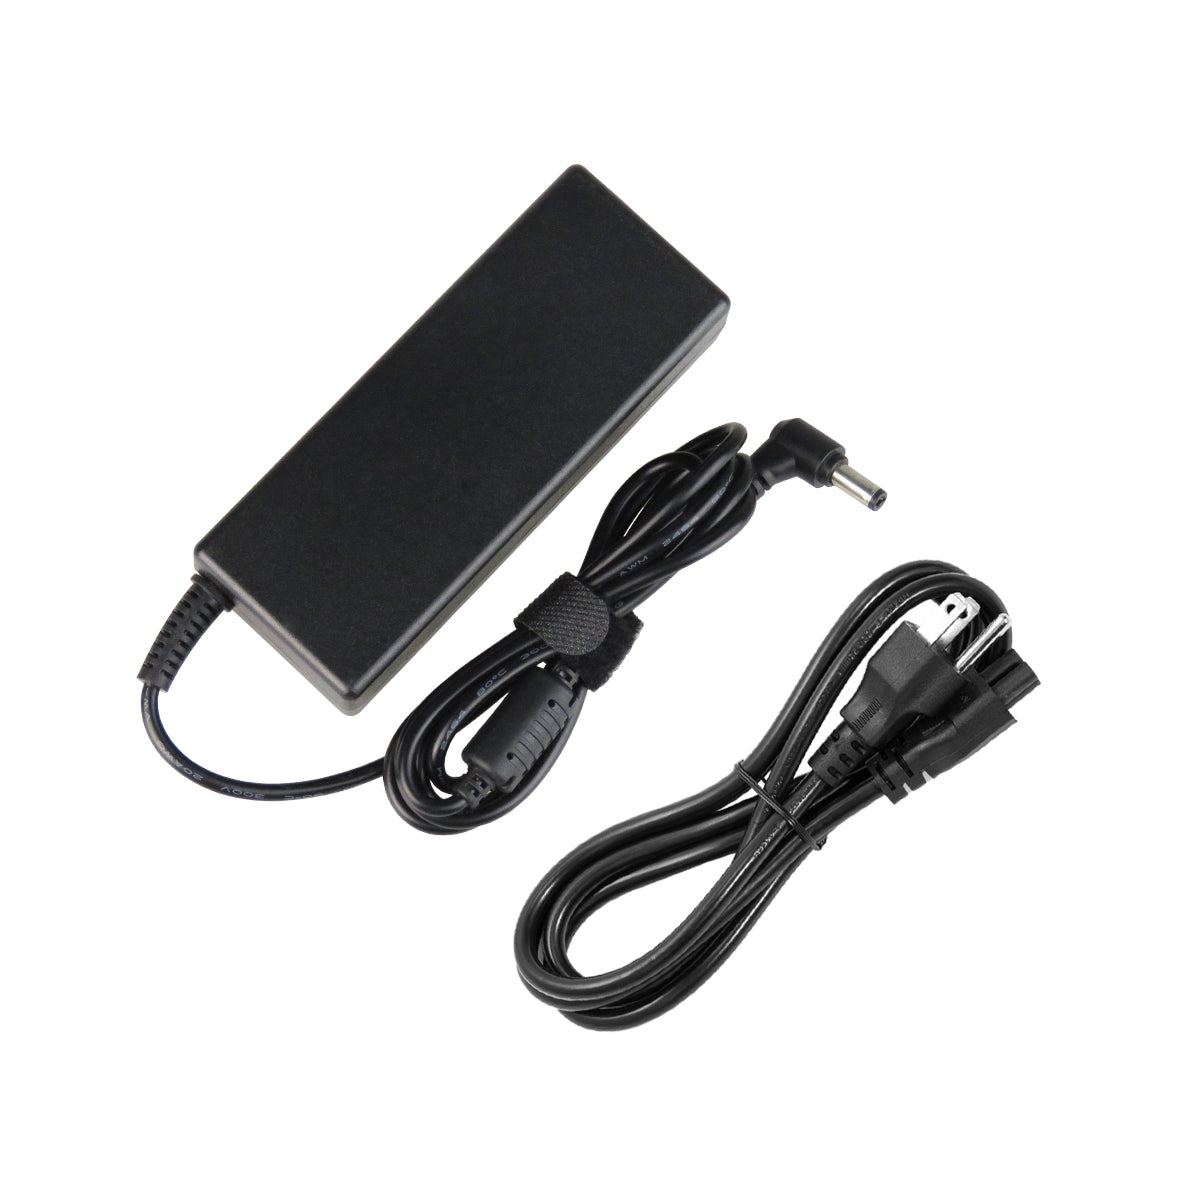 AC Adapter Charger for ASUS X82 Series Notebook.